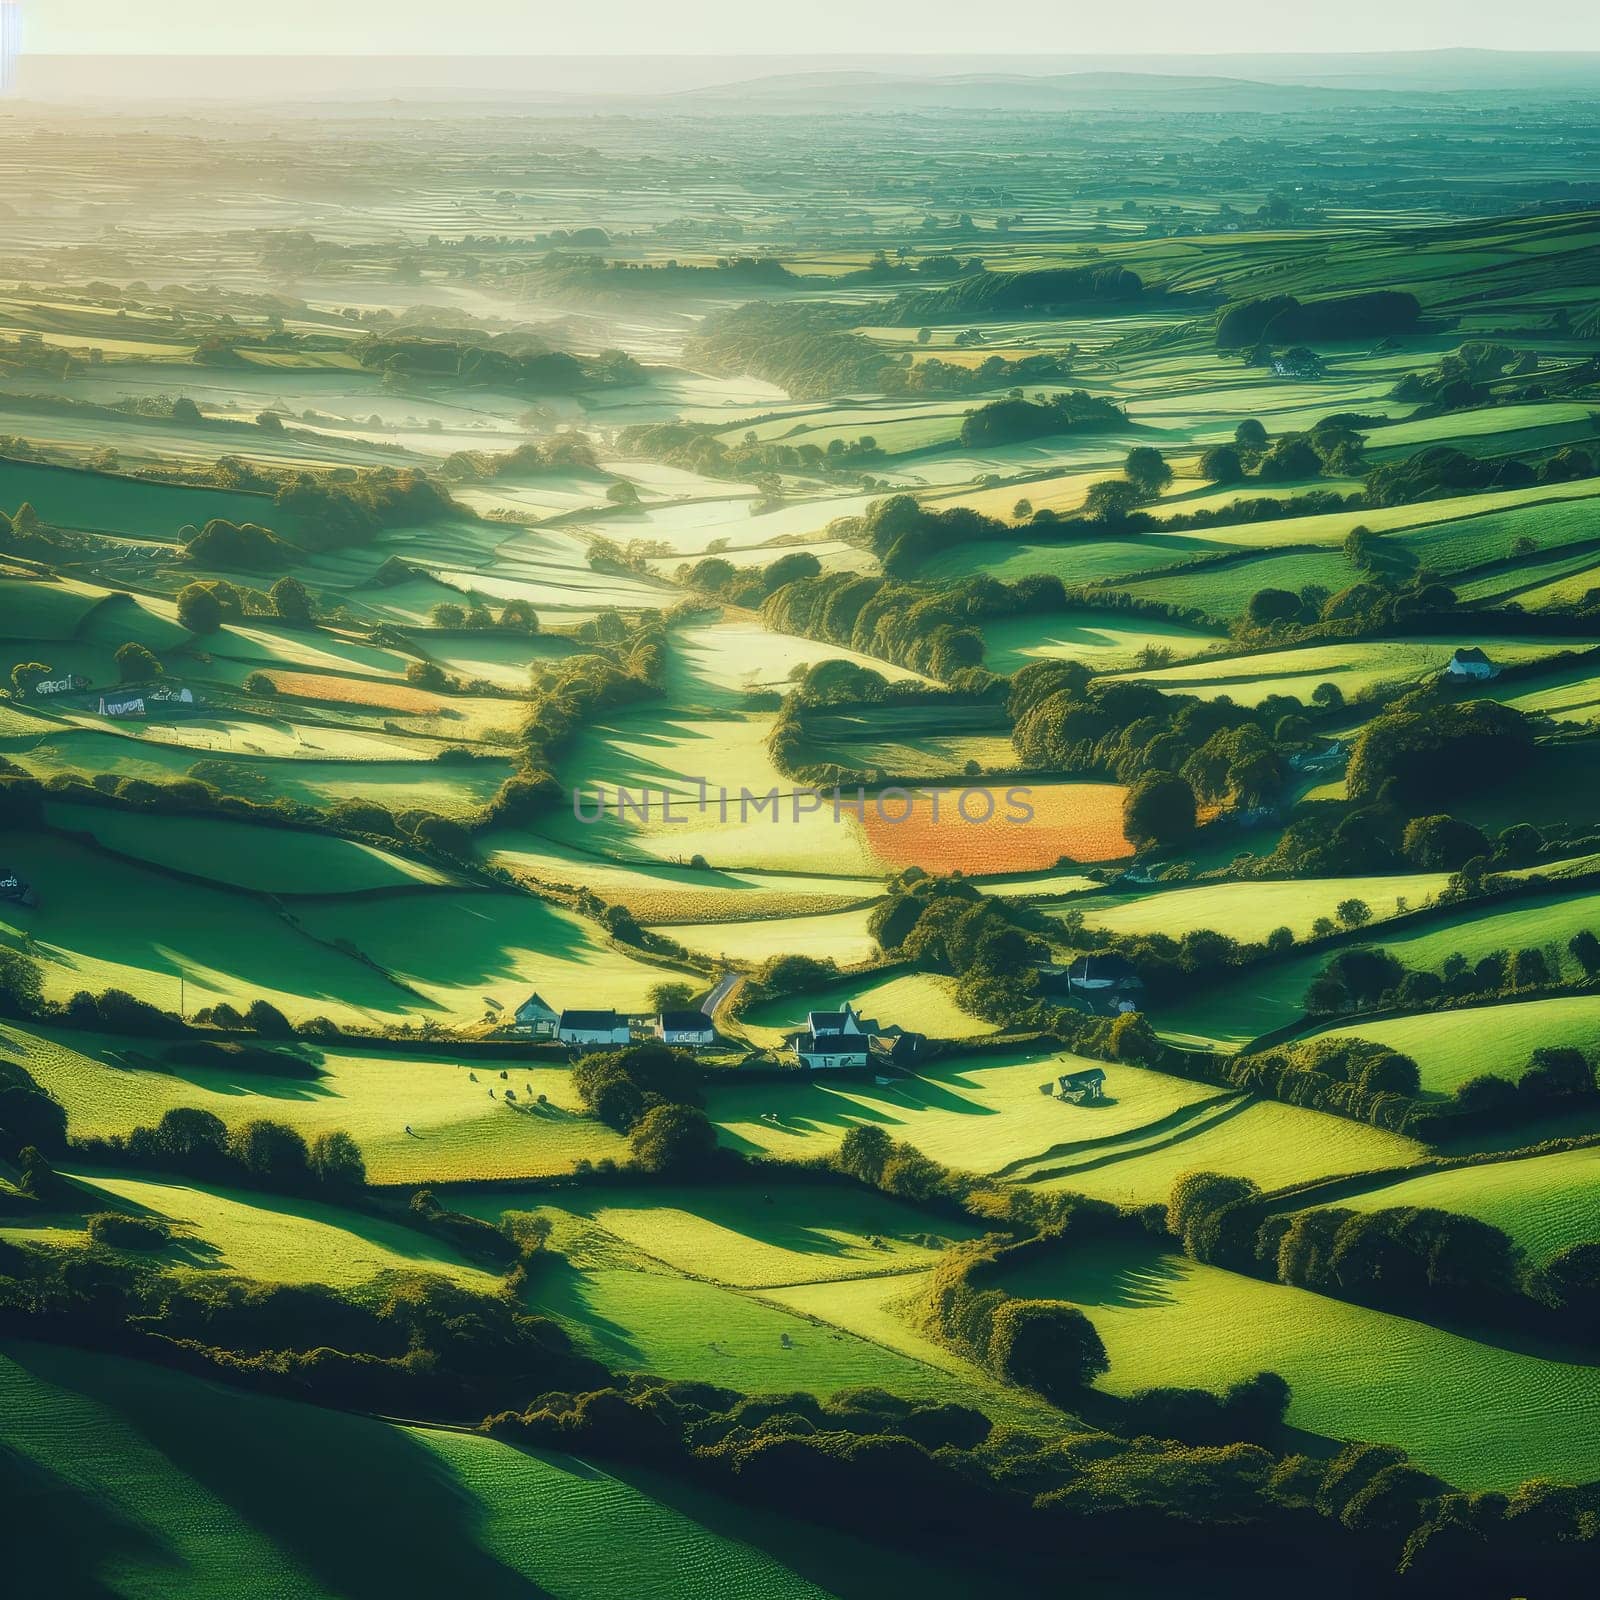 Aerial view of endless lush pastures and farmlands of Ireland. Beautiful Irish countryside with emerald green fields and meadows. Rural landscape on sunset by Kobysh